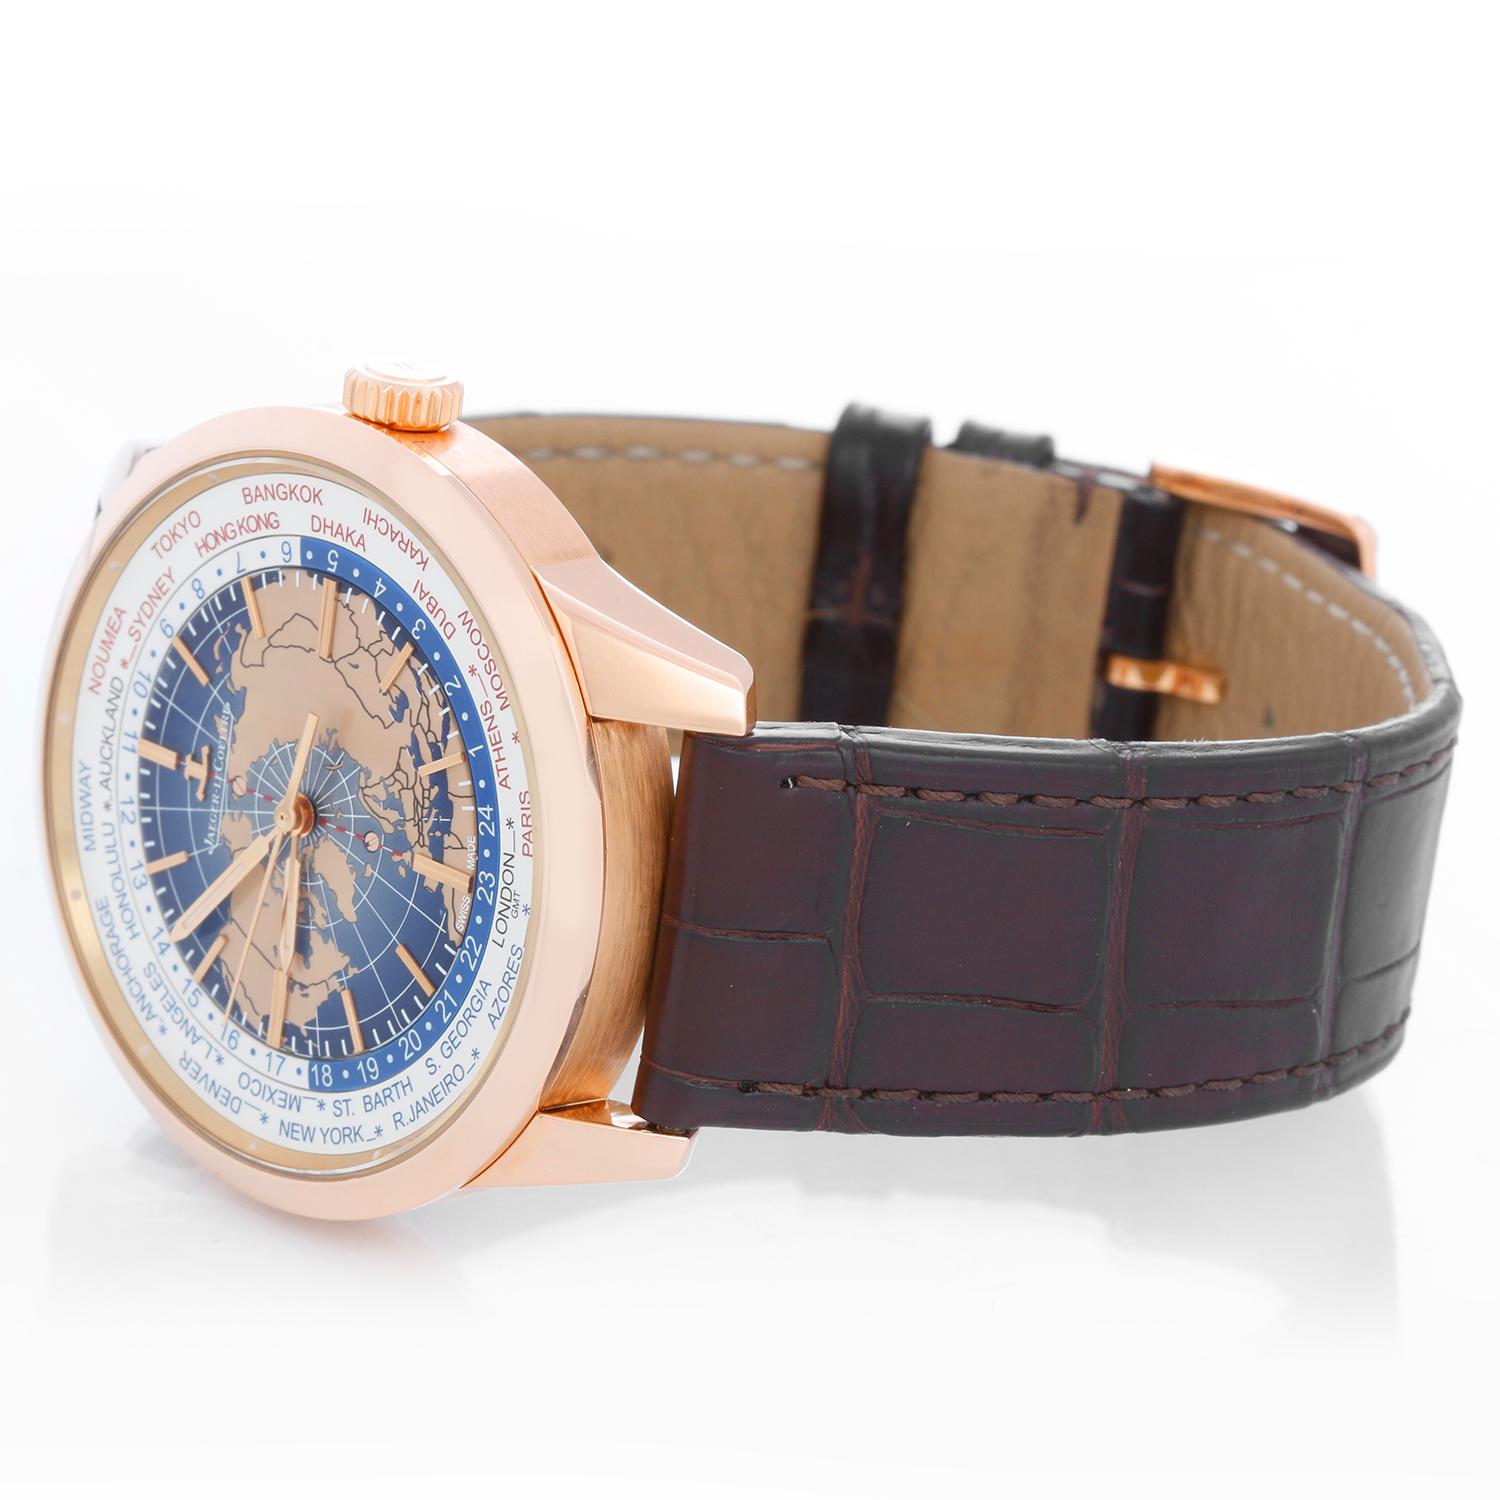 Jaeger LeCoultre Geophysic Universal Time Rose Gold Men's Watch Ref Q8102520 - Automatic winding. 18K Rose gold with exposition back ( 42 mm ). Multi-color world time dial with rose gold hour markers. Dark brown alligator strap with 18K Rose gold